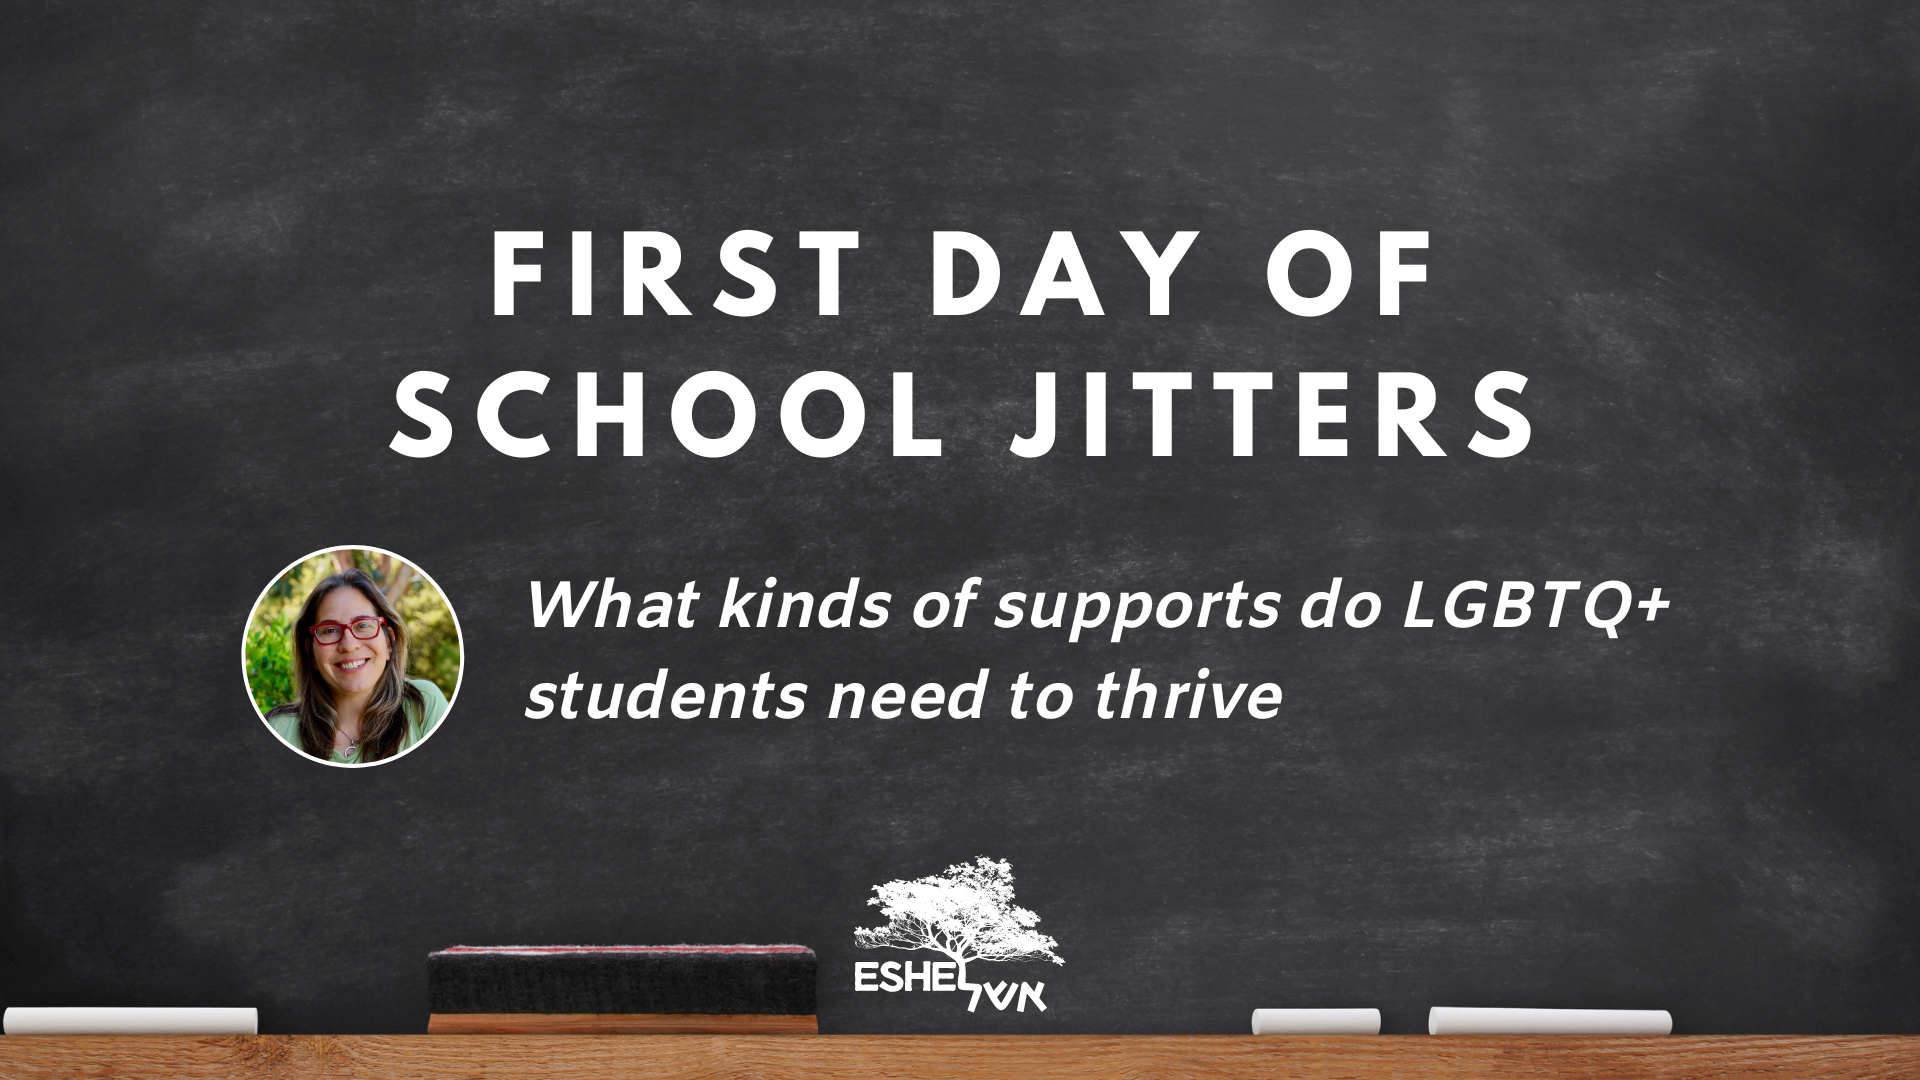 First Day of School Jitters: What kinds of supports do LGBTQ+ students need to thrive